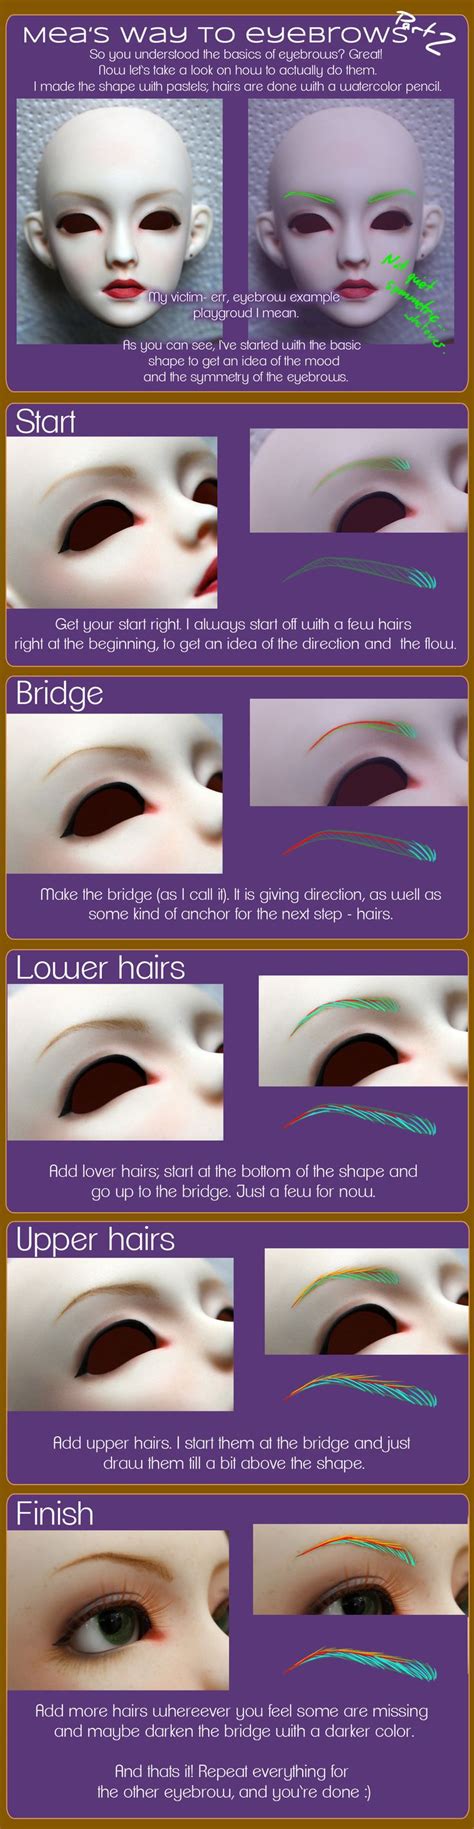 Faceup Eyebrow Guide Pt 2 By Meanae On Deviantart Eyebrow Guide Doll Repaint Tutorial Eyebrows